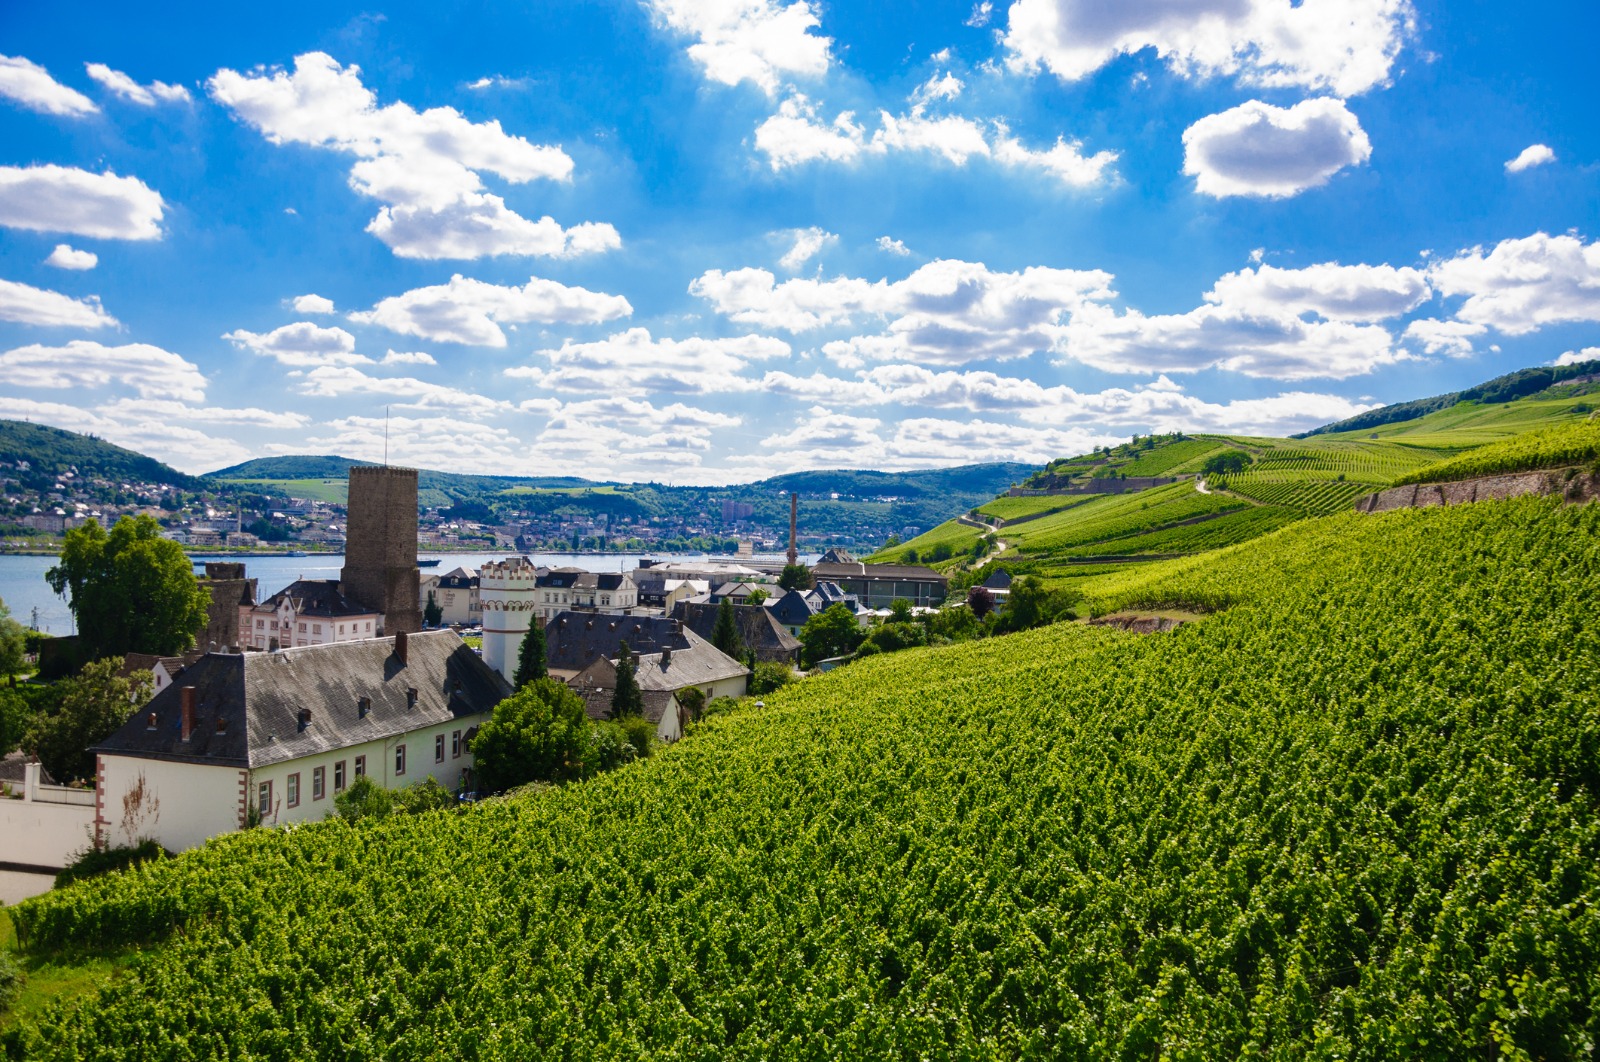 10day River cruise package vacation on the Rhine Flight included